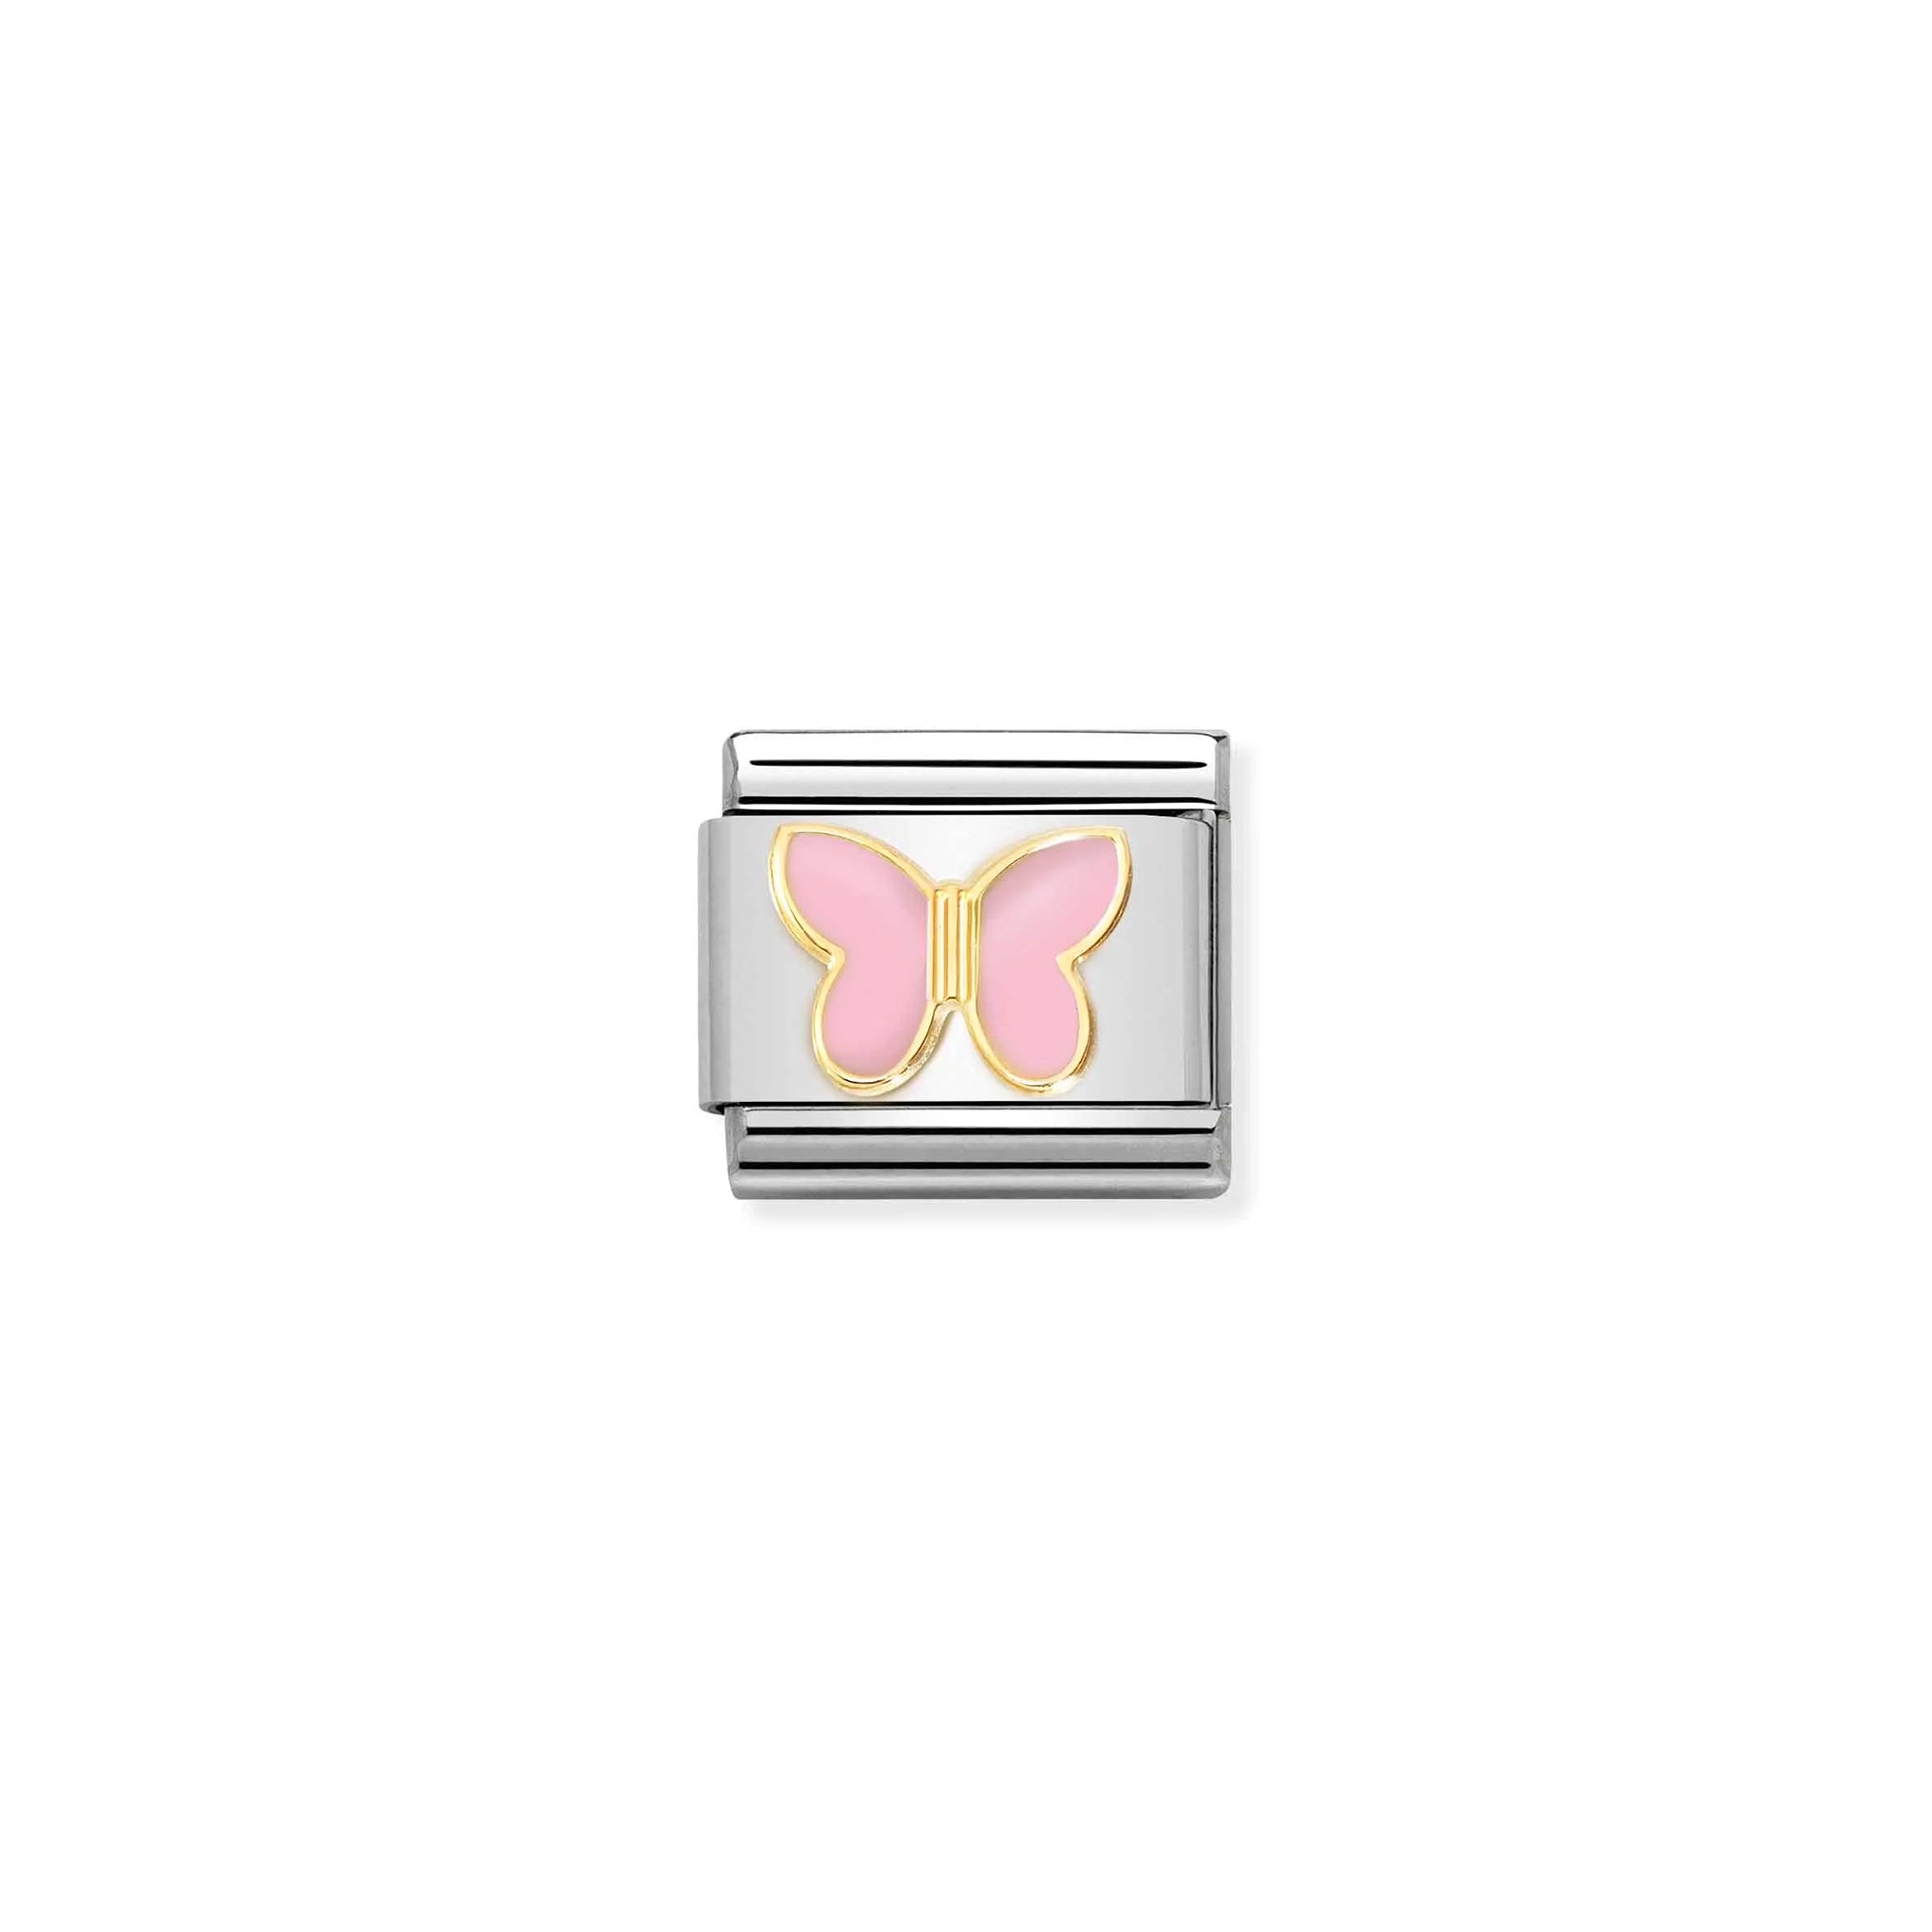 Nomination charm link featuring a gold butterfly with light pink enamel wings